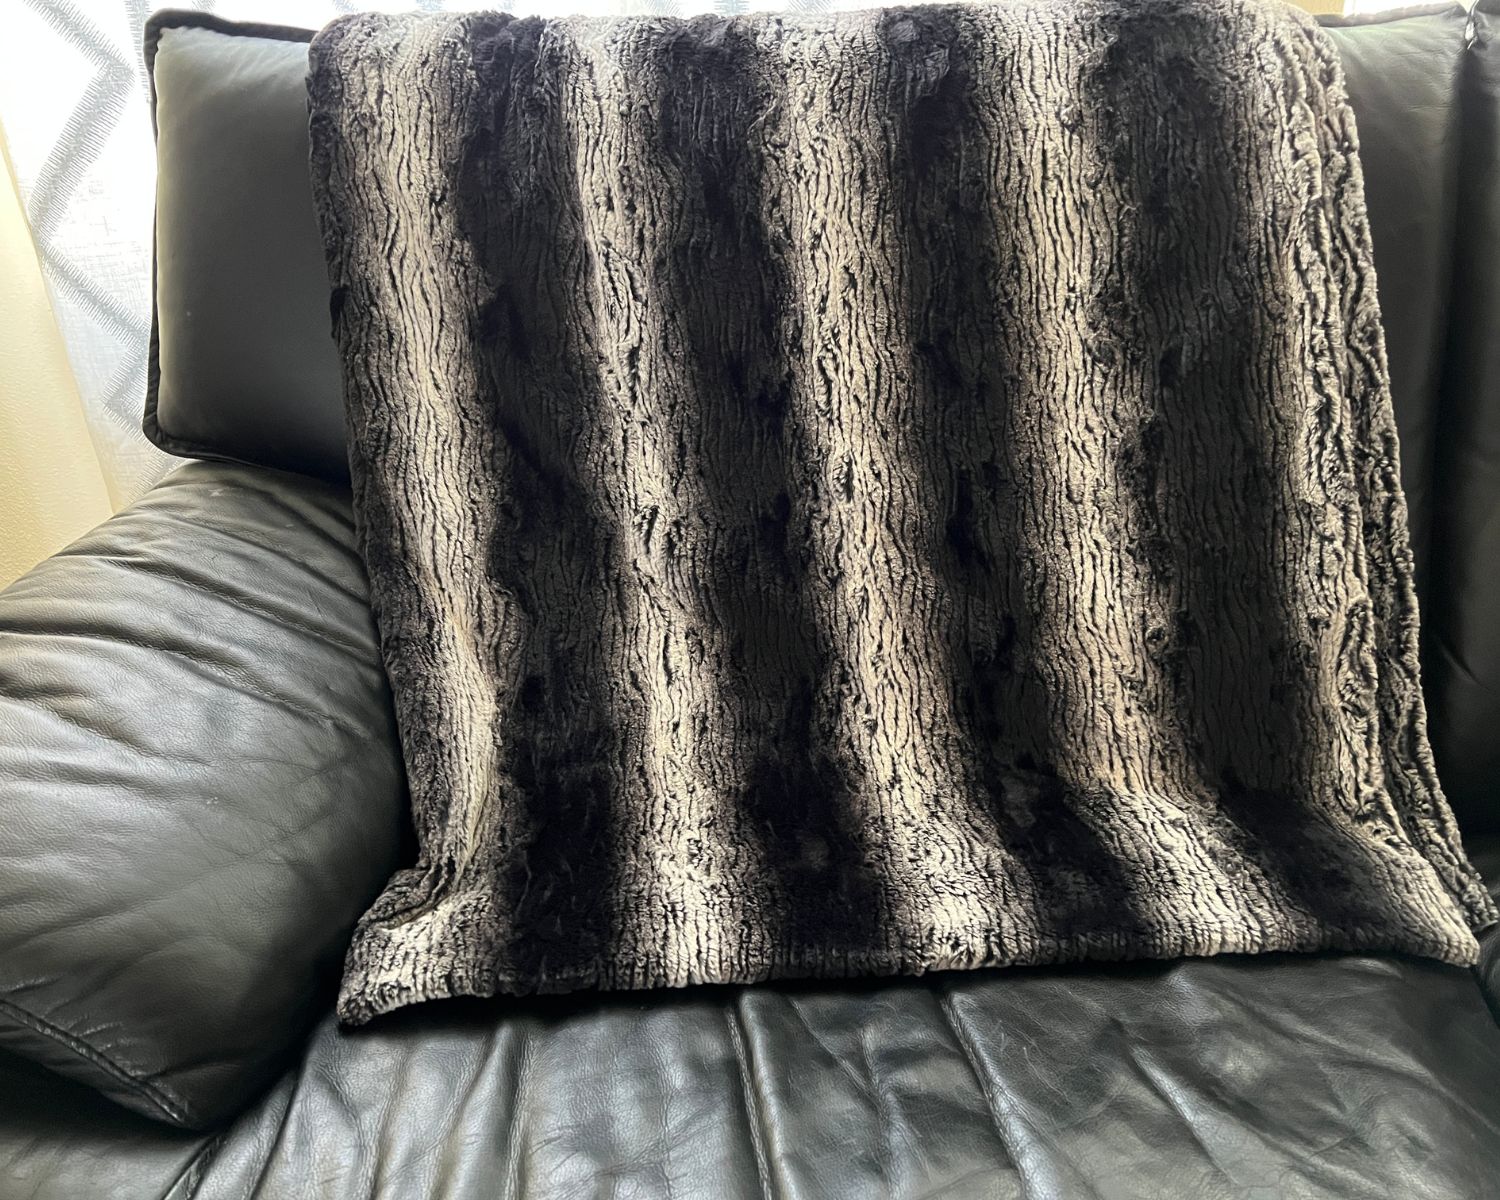 Faux fur throw in Smouldering Sequoia draped over back of black leather sofa. Made in Seattle, WA, USA. Pandemonium Millinery.